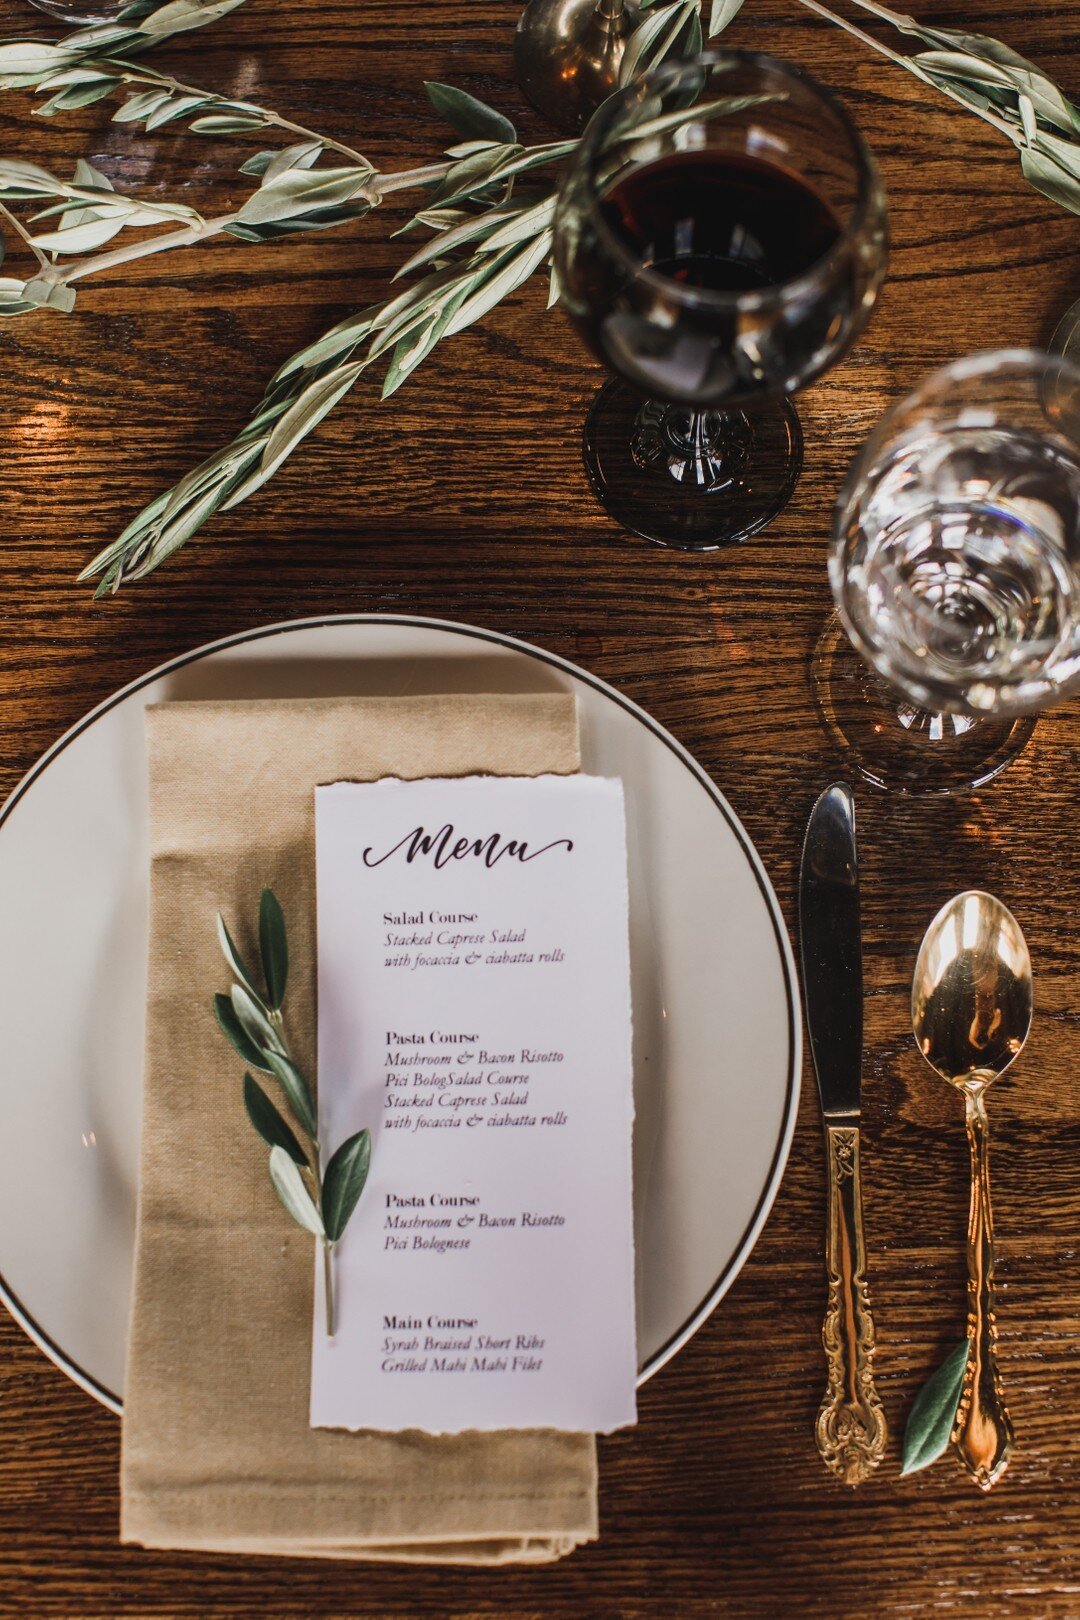 Printed menus are a simple way to up the elegance on your wedding day! Plus, you can always add a sweet little thank you to all of yours guests for an extra personal touch.⁣
Styled Shoot by @gloriousweddingsevents &amp; @arliquinnphotography